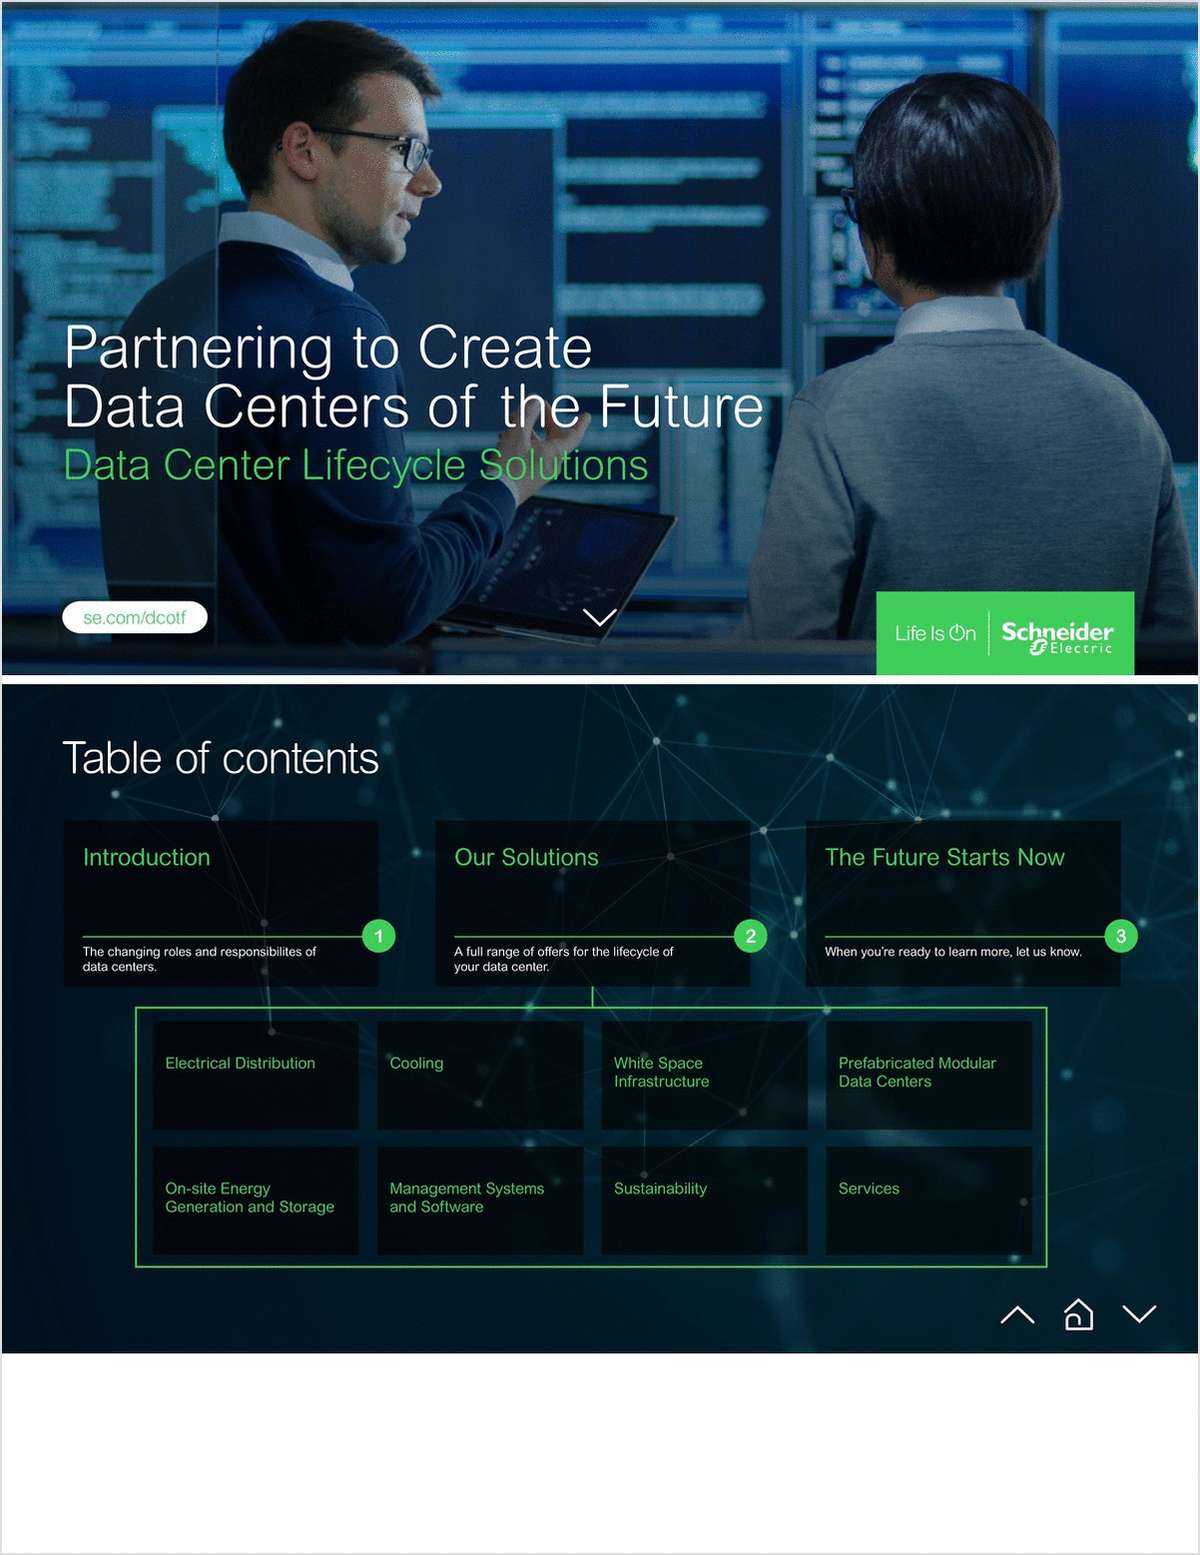 Partnering to Create Data Centers of the Future - Data Center Lifecycle Solutions